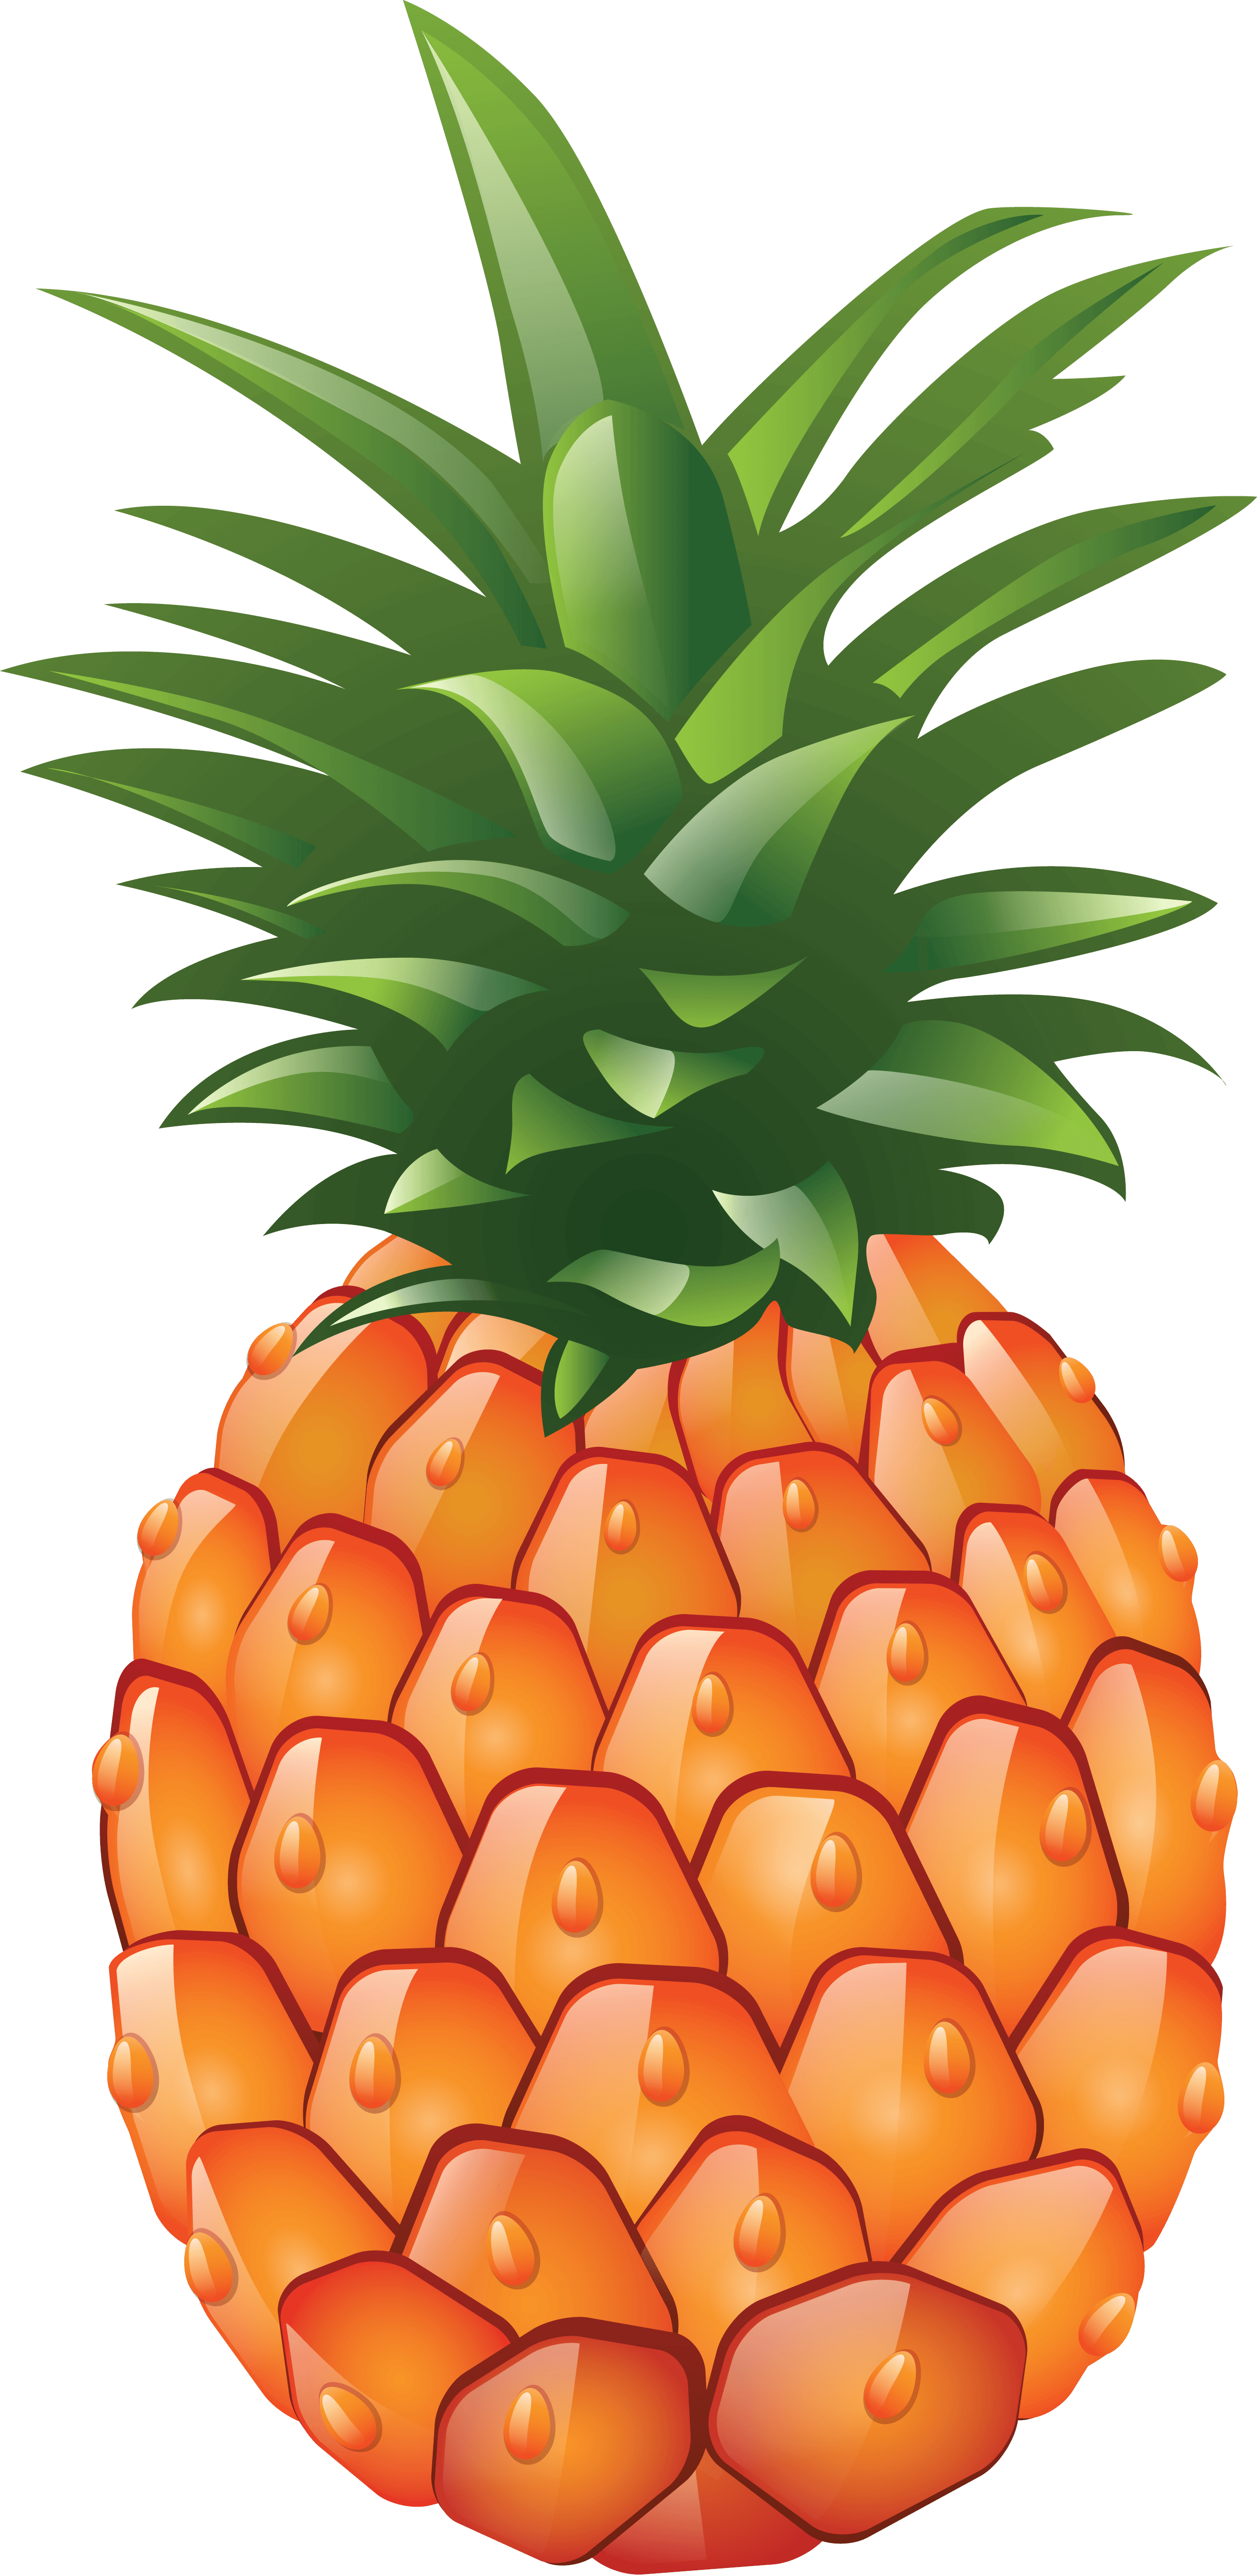 Download PNG image - Pineapple PNG Photo Image 